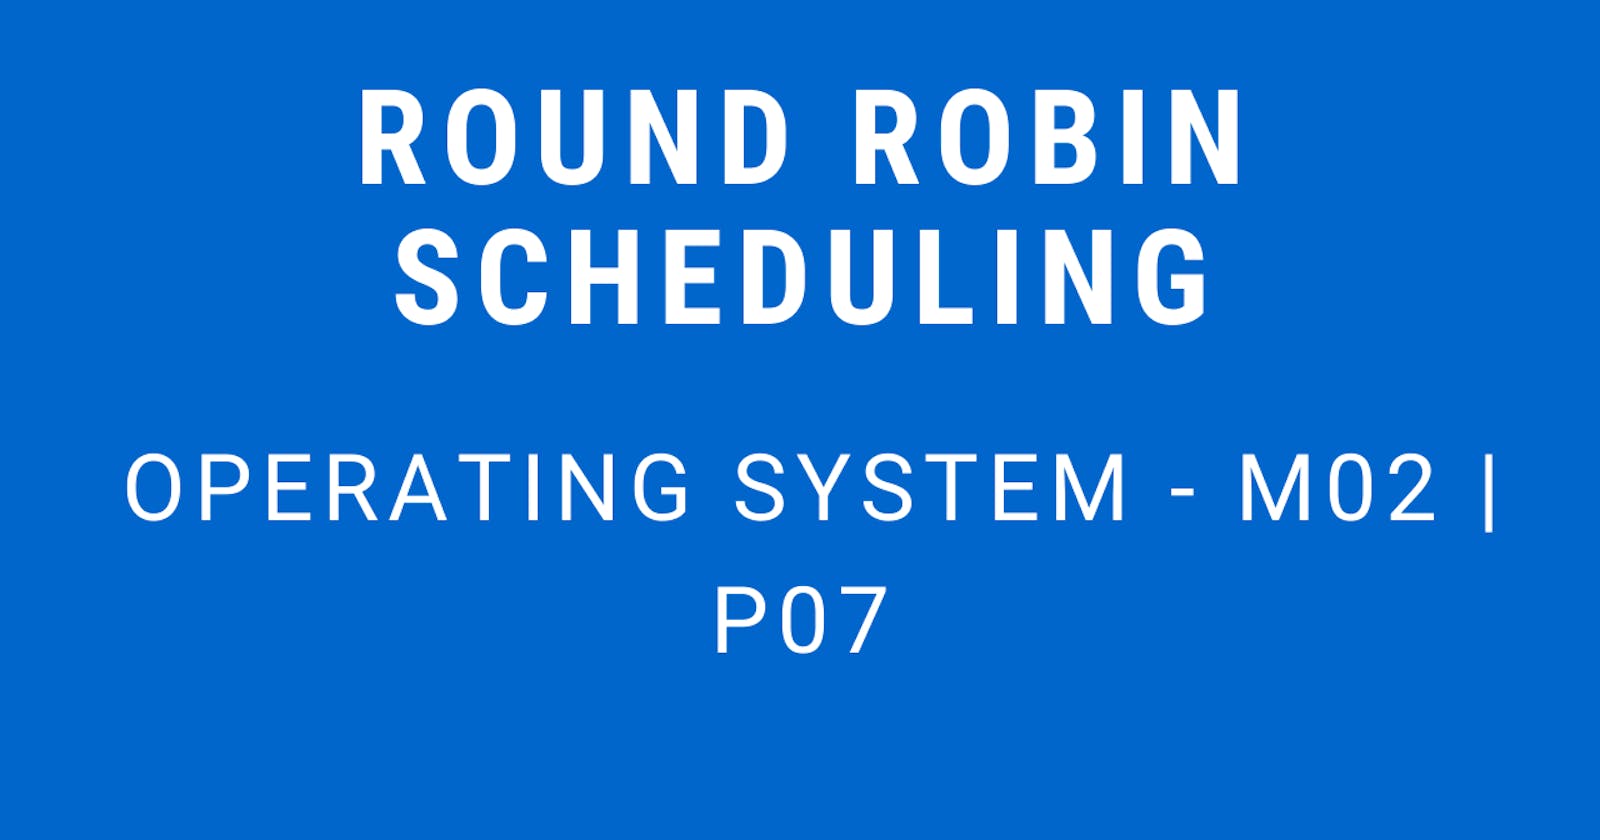 Round Robin Scheduling | Operating System - M02 P07